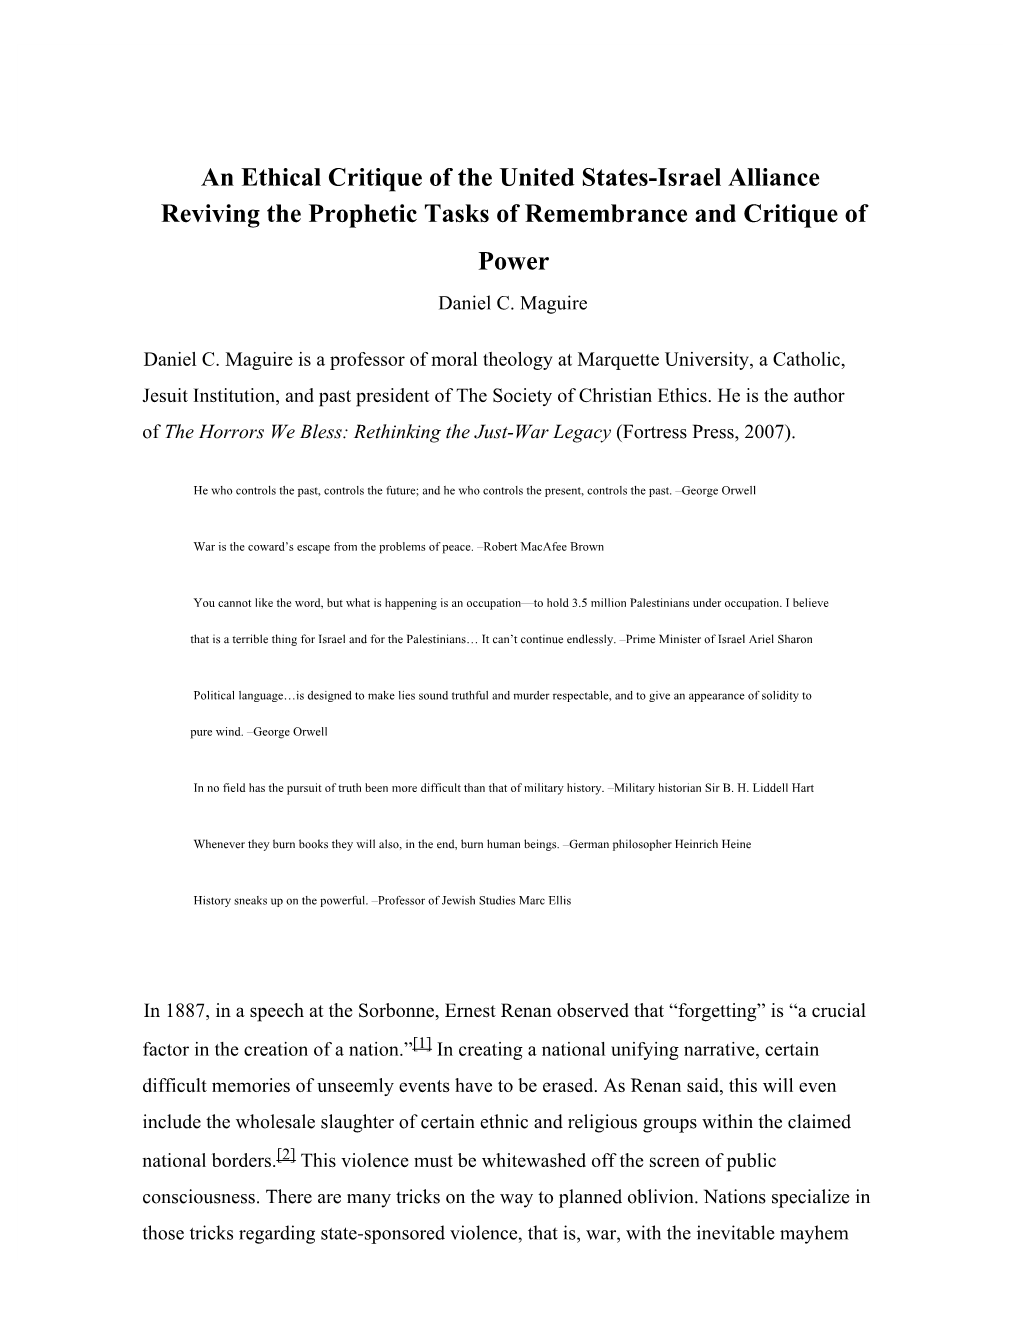 An Ethical Critique of the United States-Israel Alliance Reviving the Prophetic Tasks of Remembrance and Critique of Power Daniel C